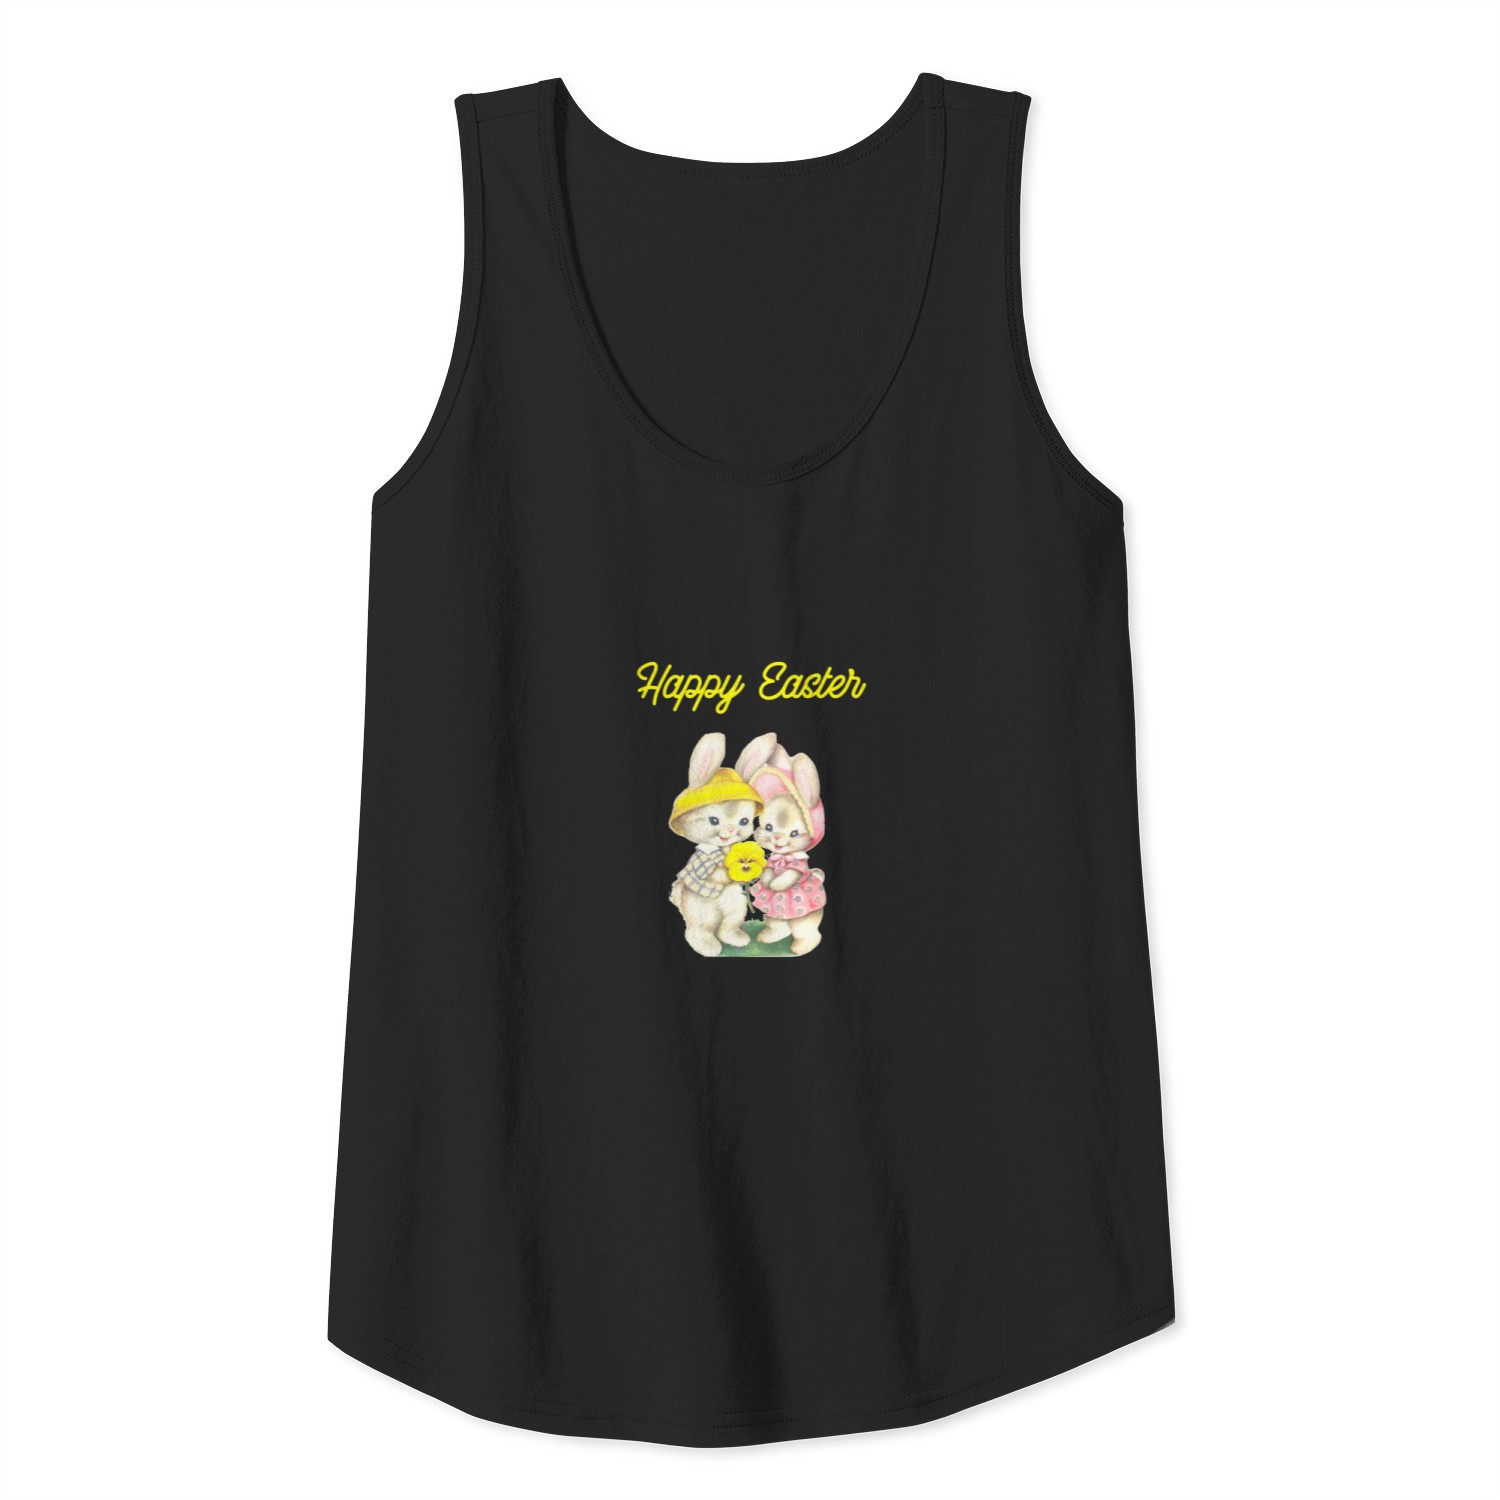 These Bunnies Wish You A Happy Easter Tank Top